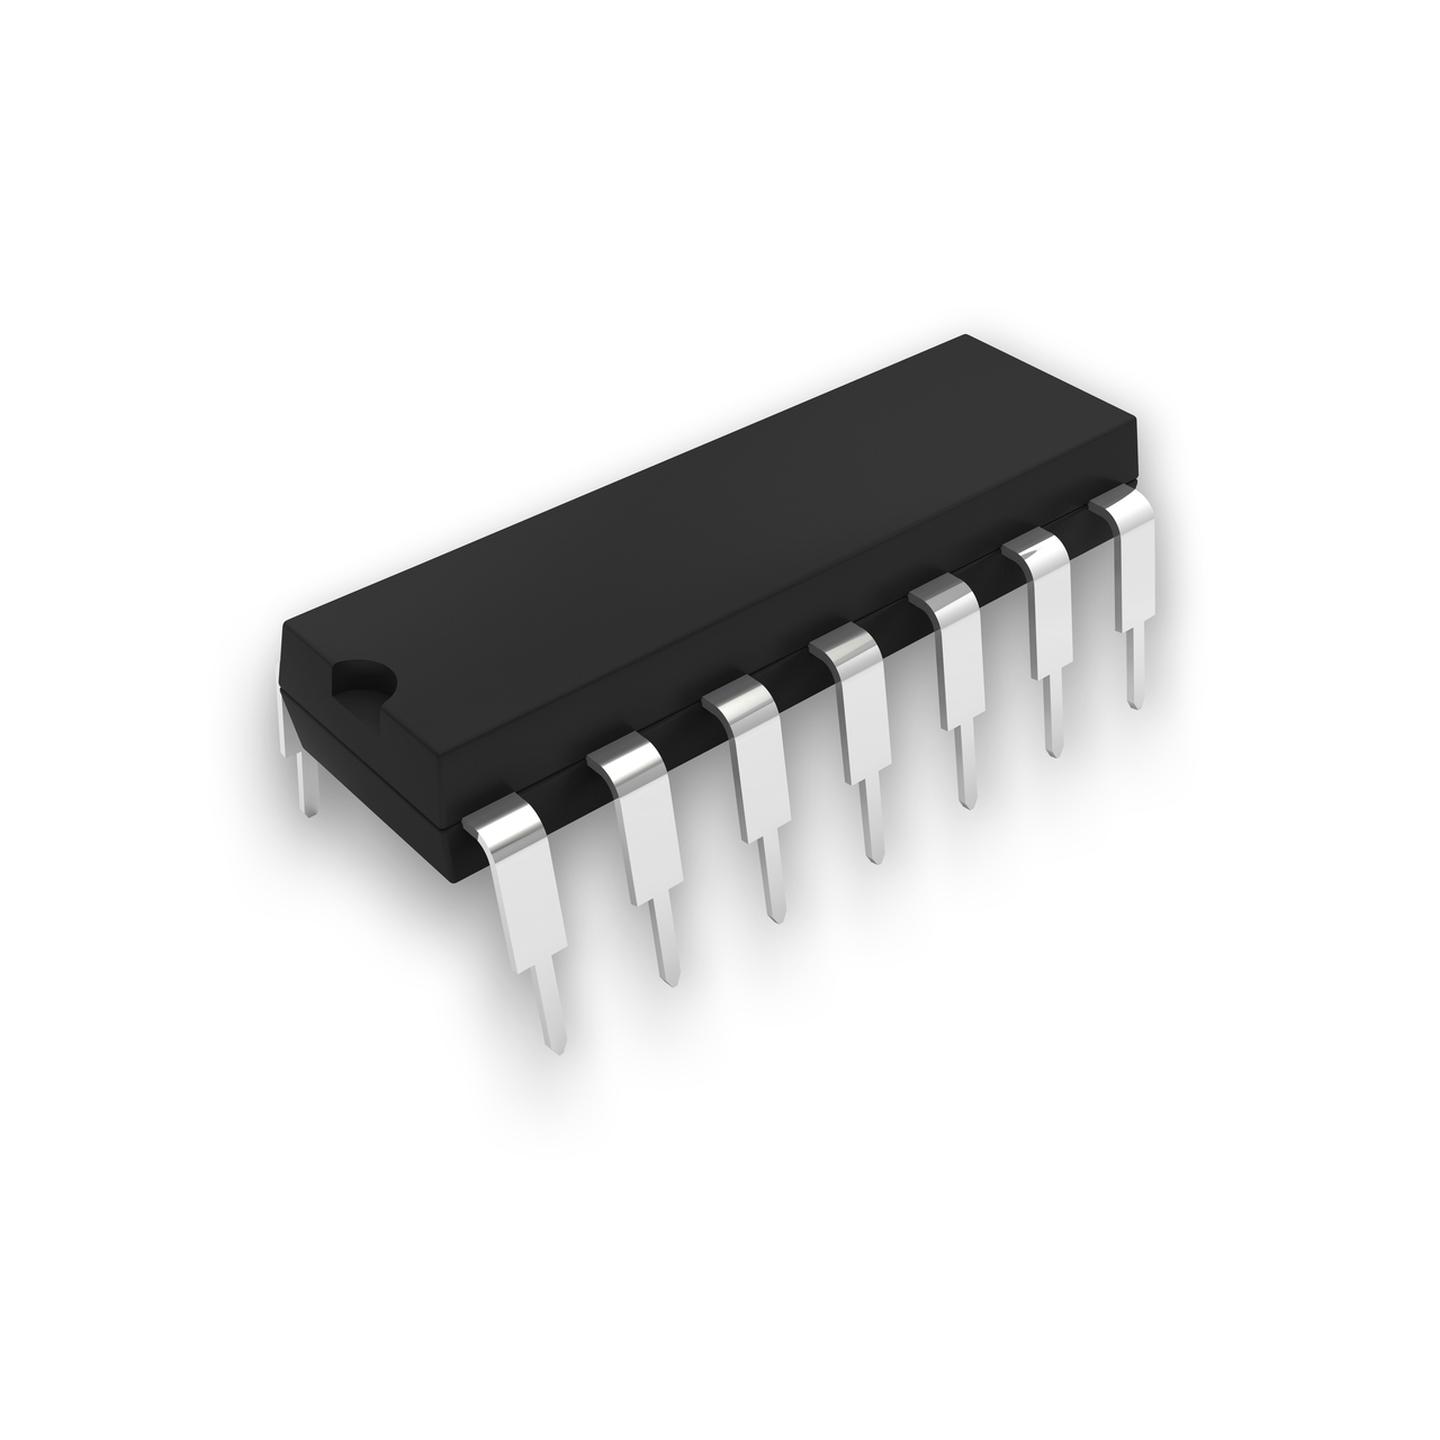 LM339 Quad Low Power Comparator Linear IC